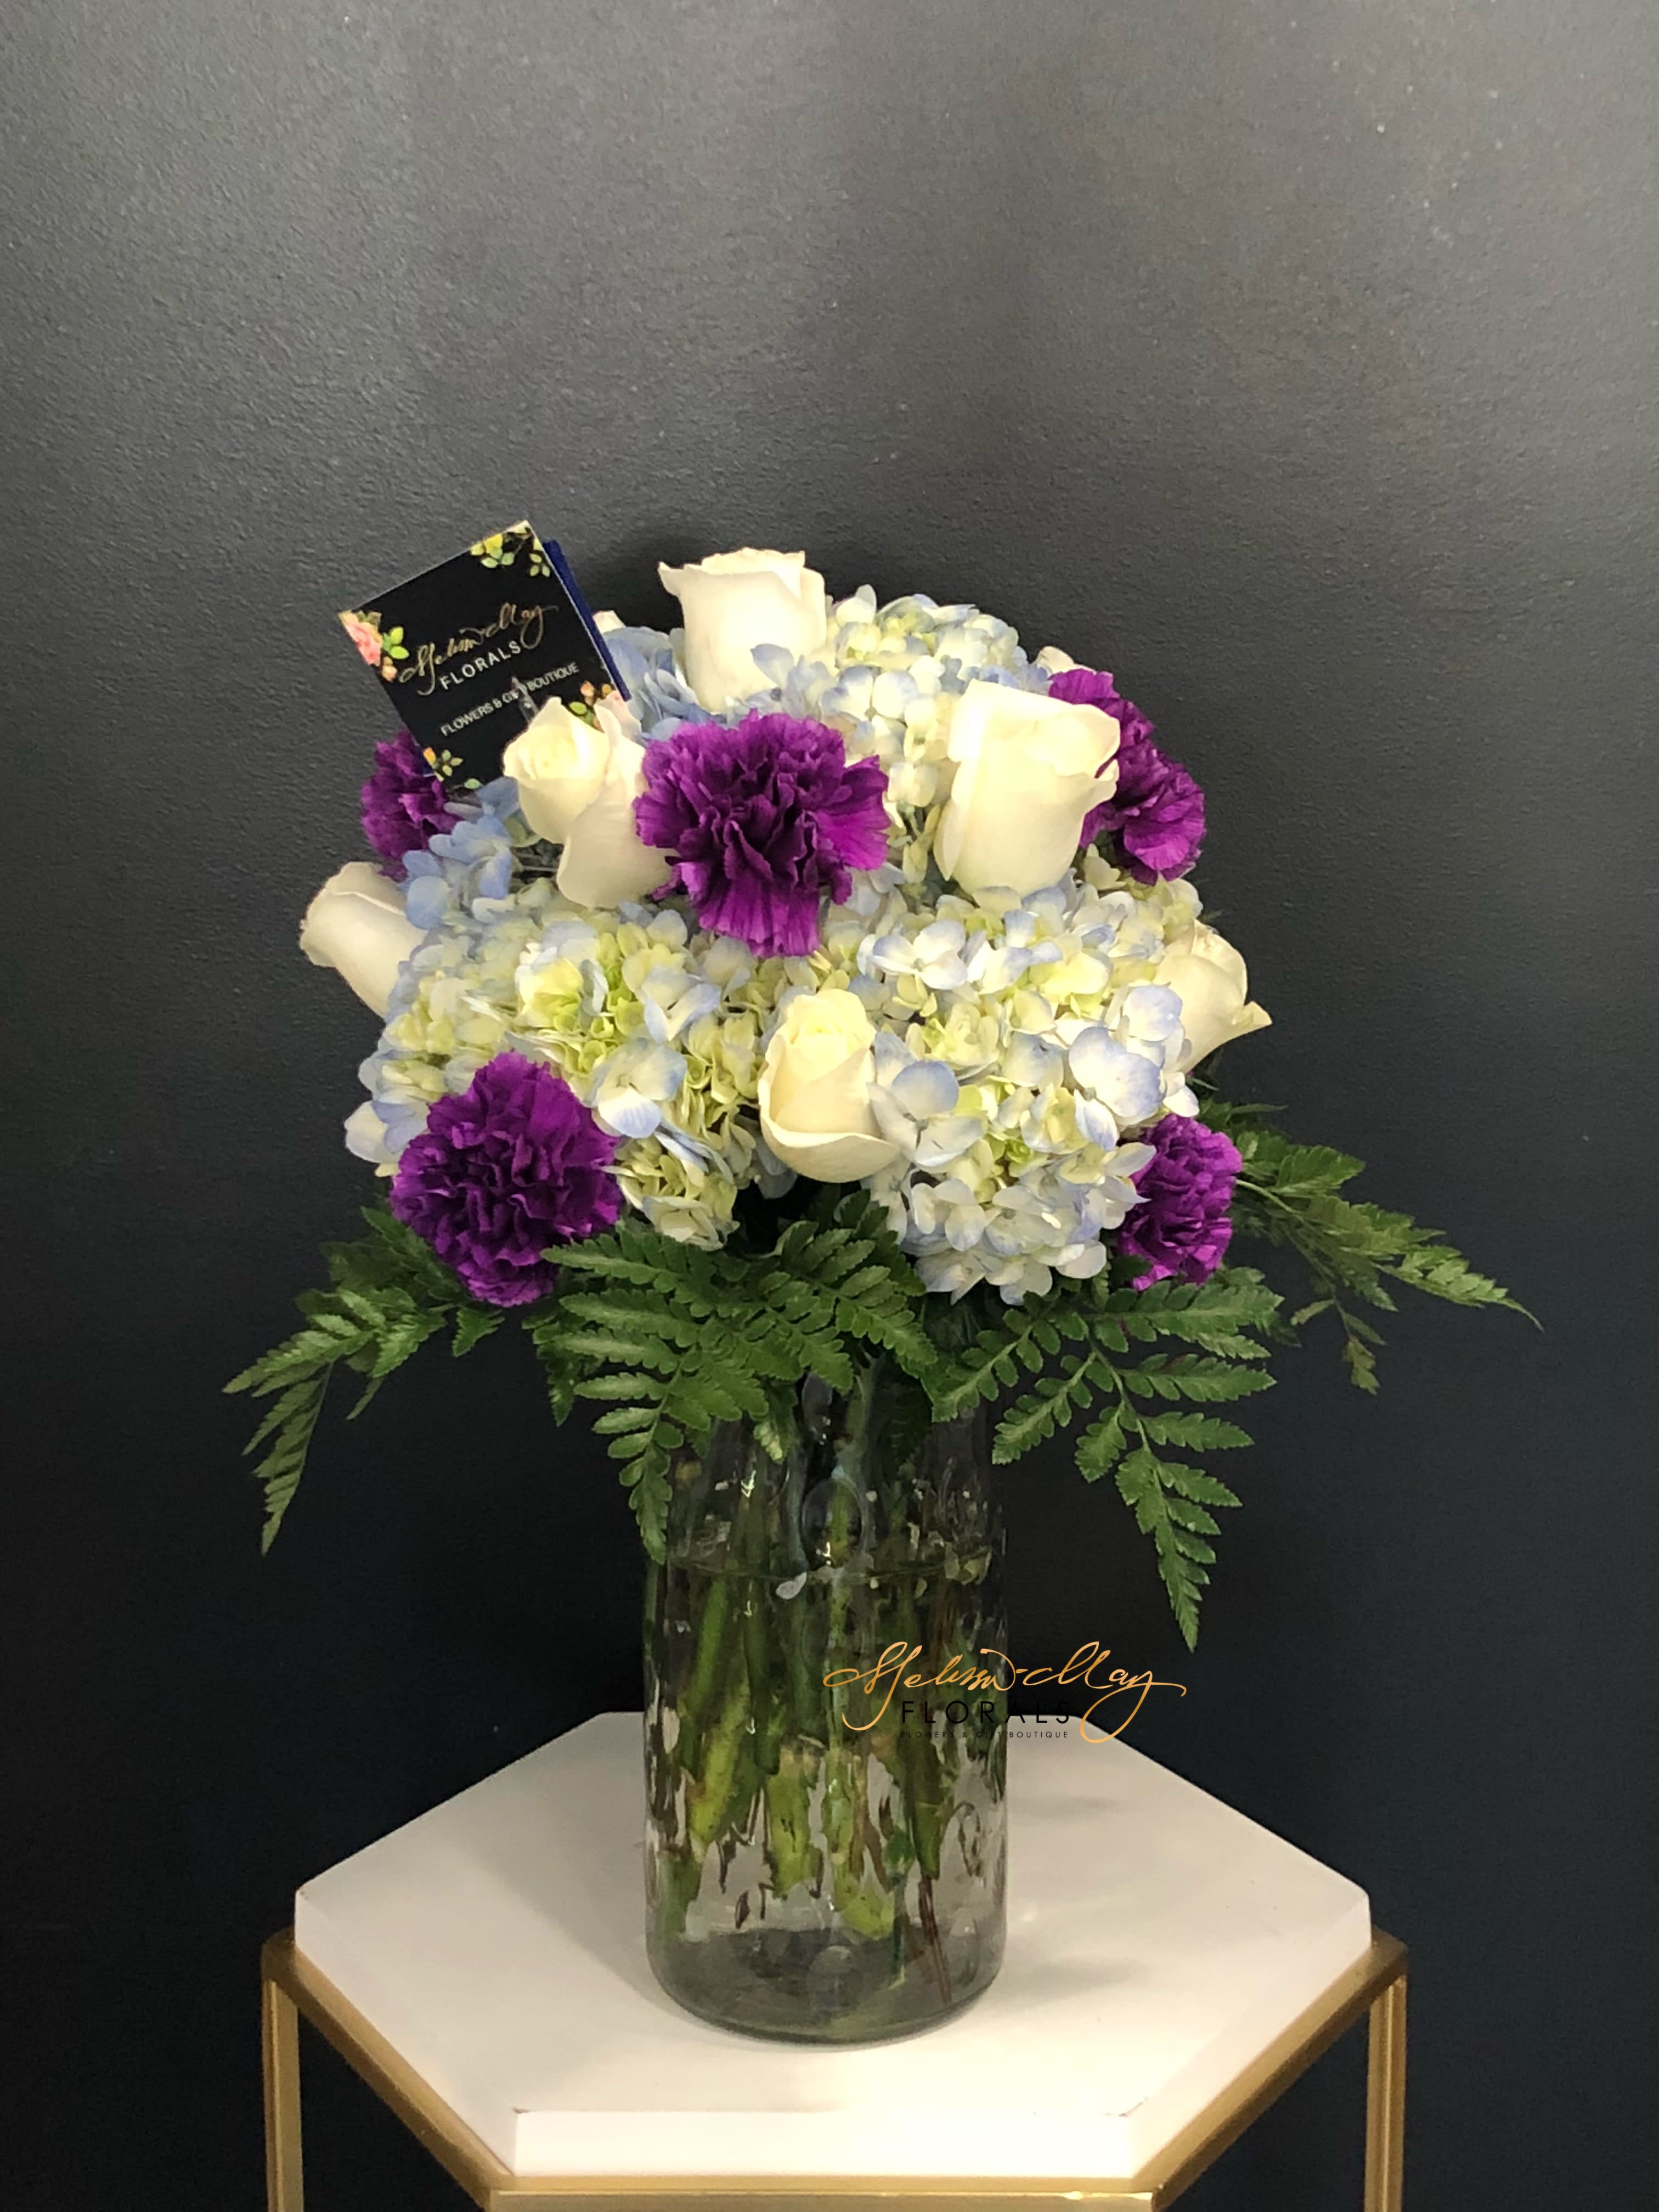 Unconditional Admiration - You will always come and find an arrangement that is just right for you. To show that special someone how much you admire them unconditionally with our purple carnations, hydrangeas, and long lasting white roses.  